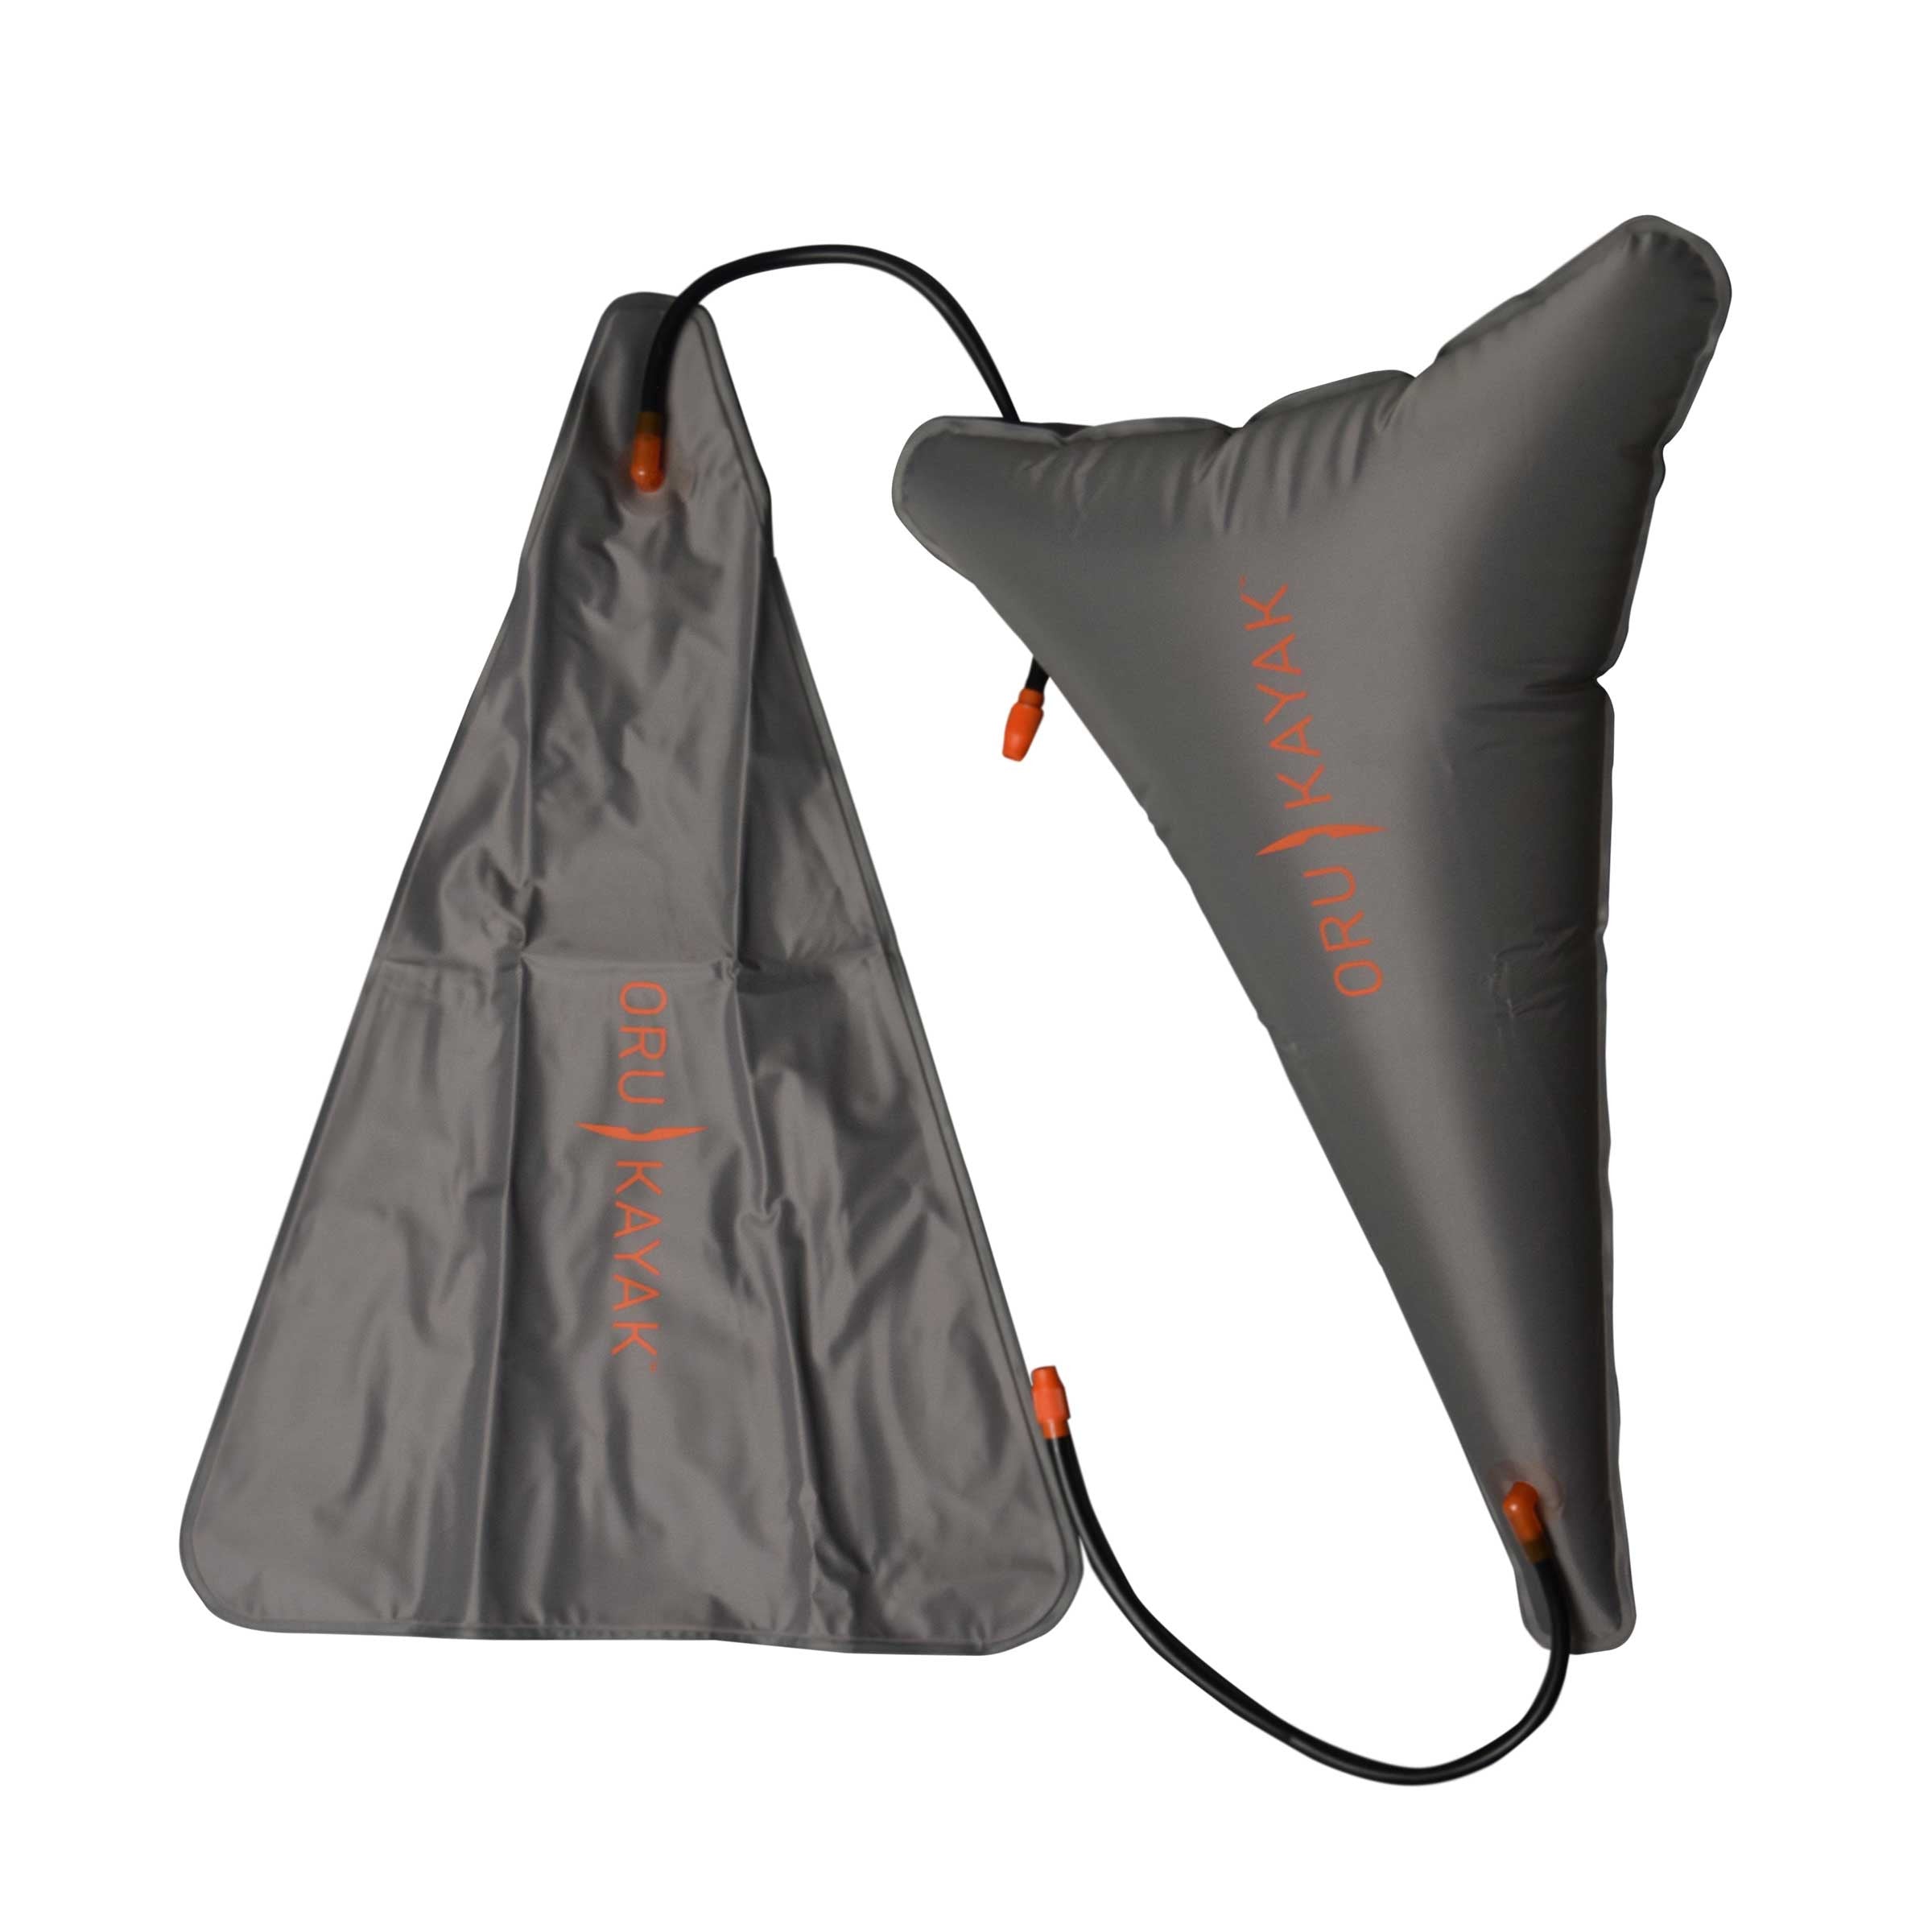 Floats bags for Penobscot 16 RX or a whitewater canoe? - Advice -  Paddling.com